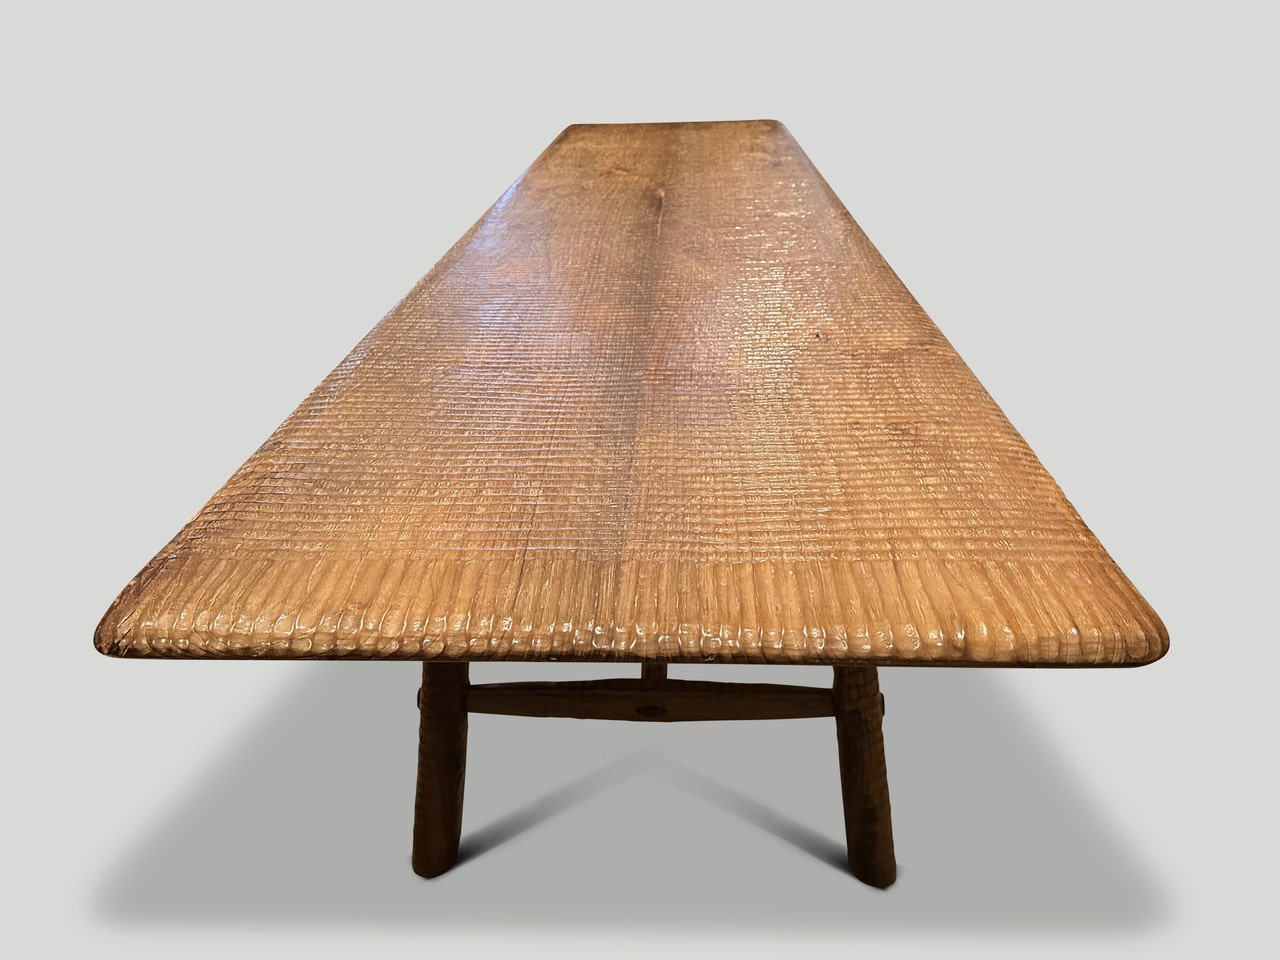 IMPRESSIVE HAND CARVED TEAK WOOD DINING TABLE OR CONSOLE